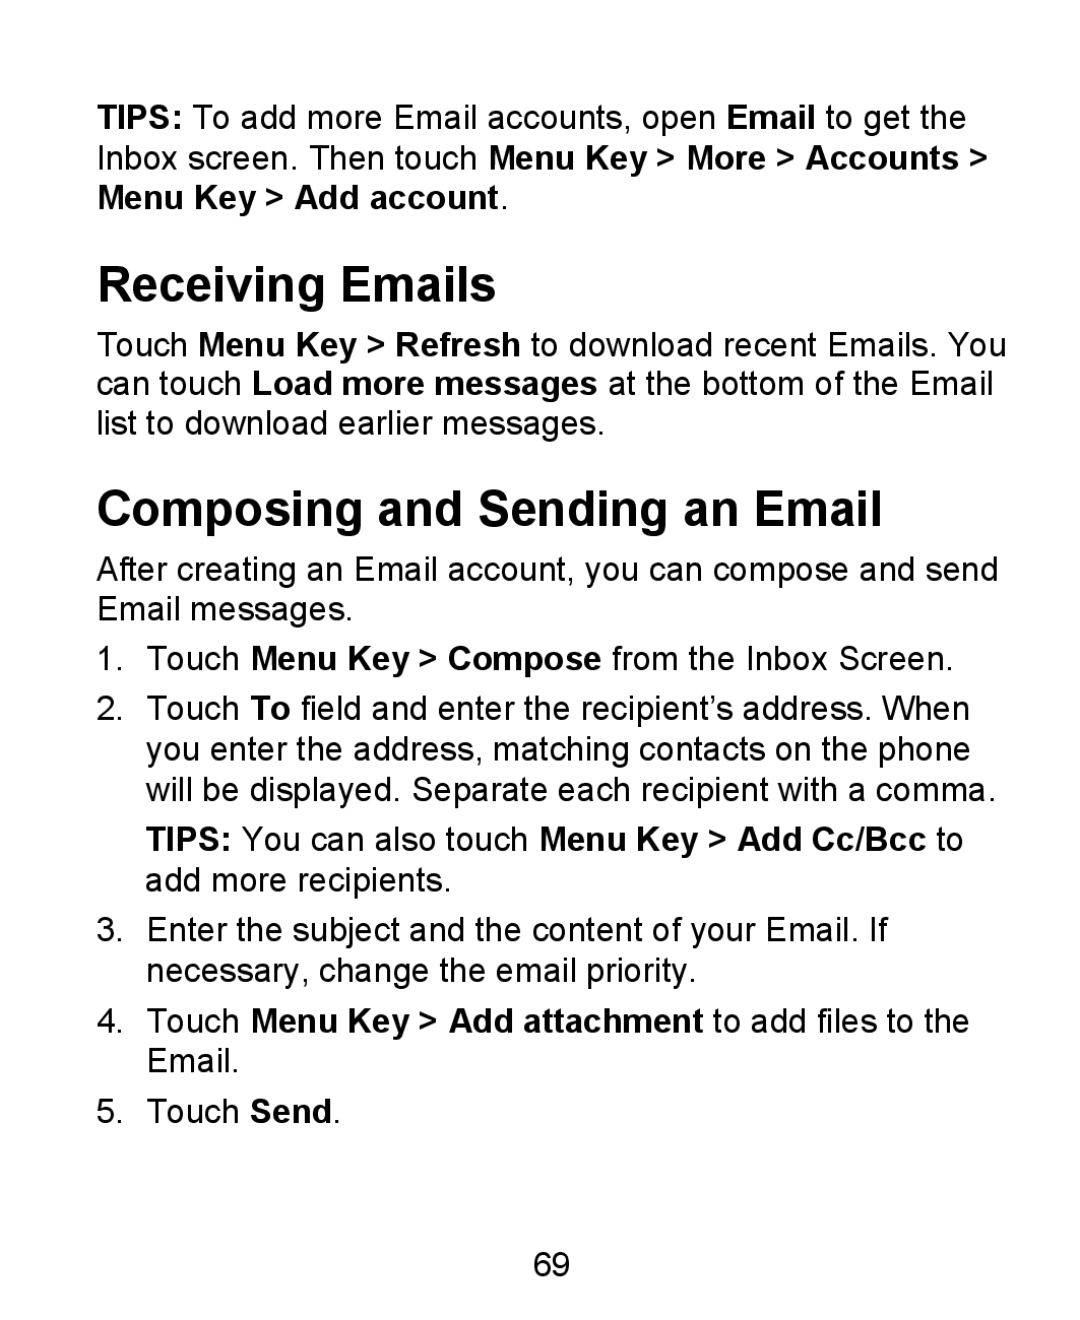 ZTE KIS Receiving Emails, Composing and Sending an Email, Touch Menu Key Add attachment to add files to the Email 